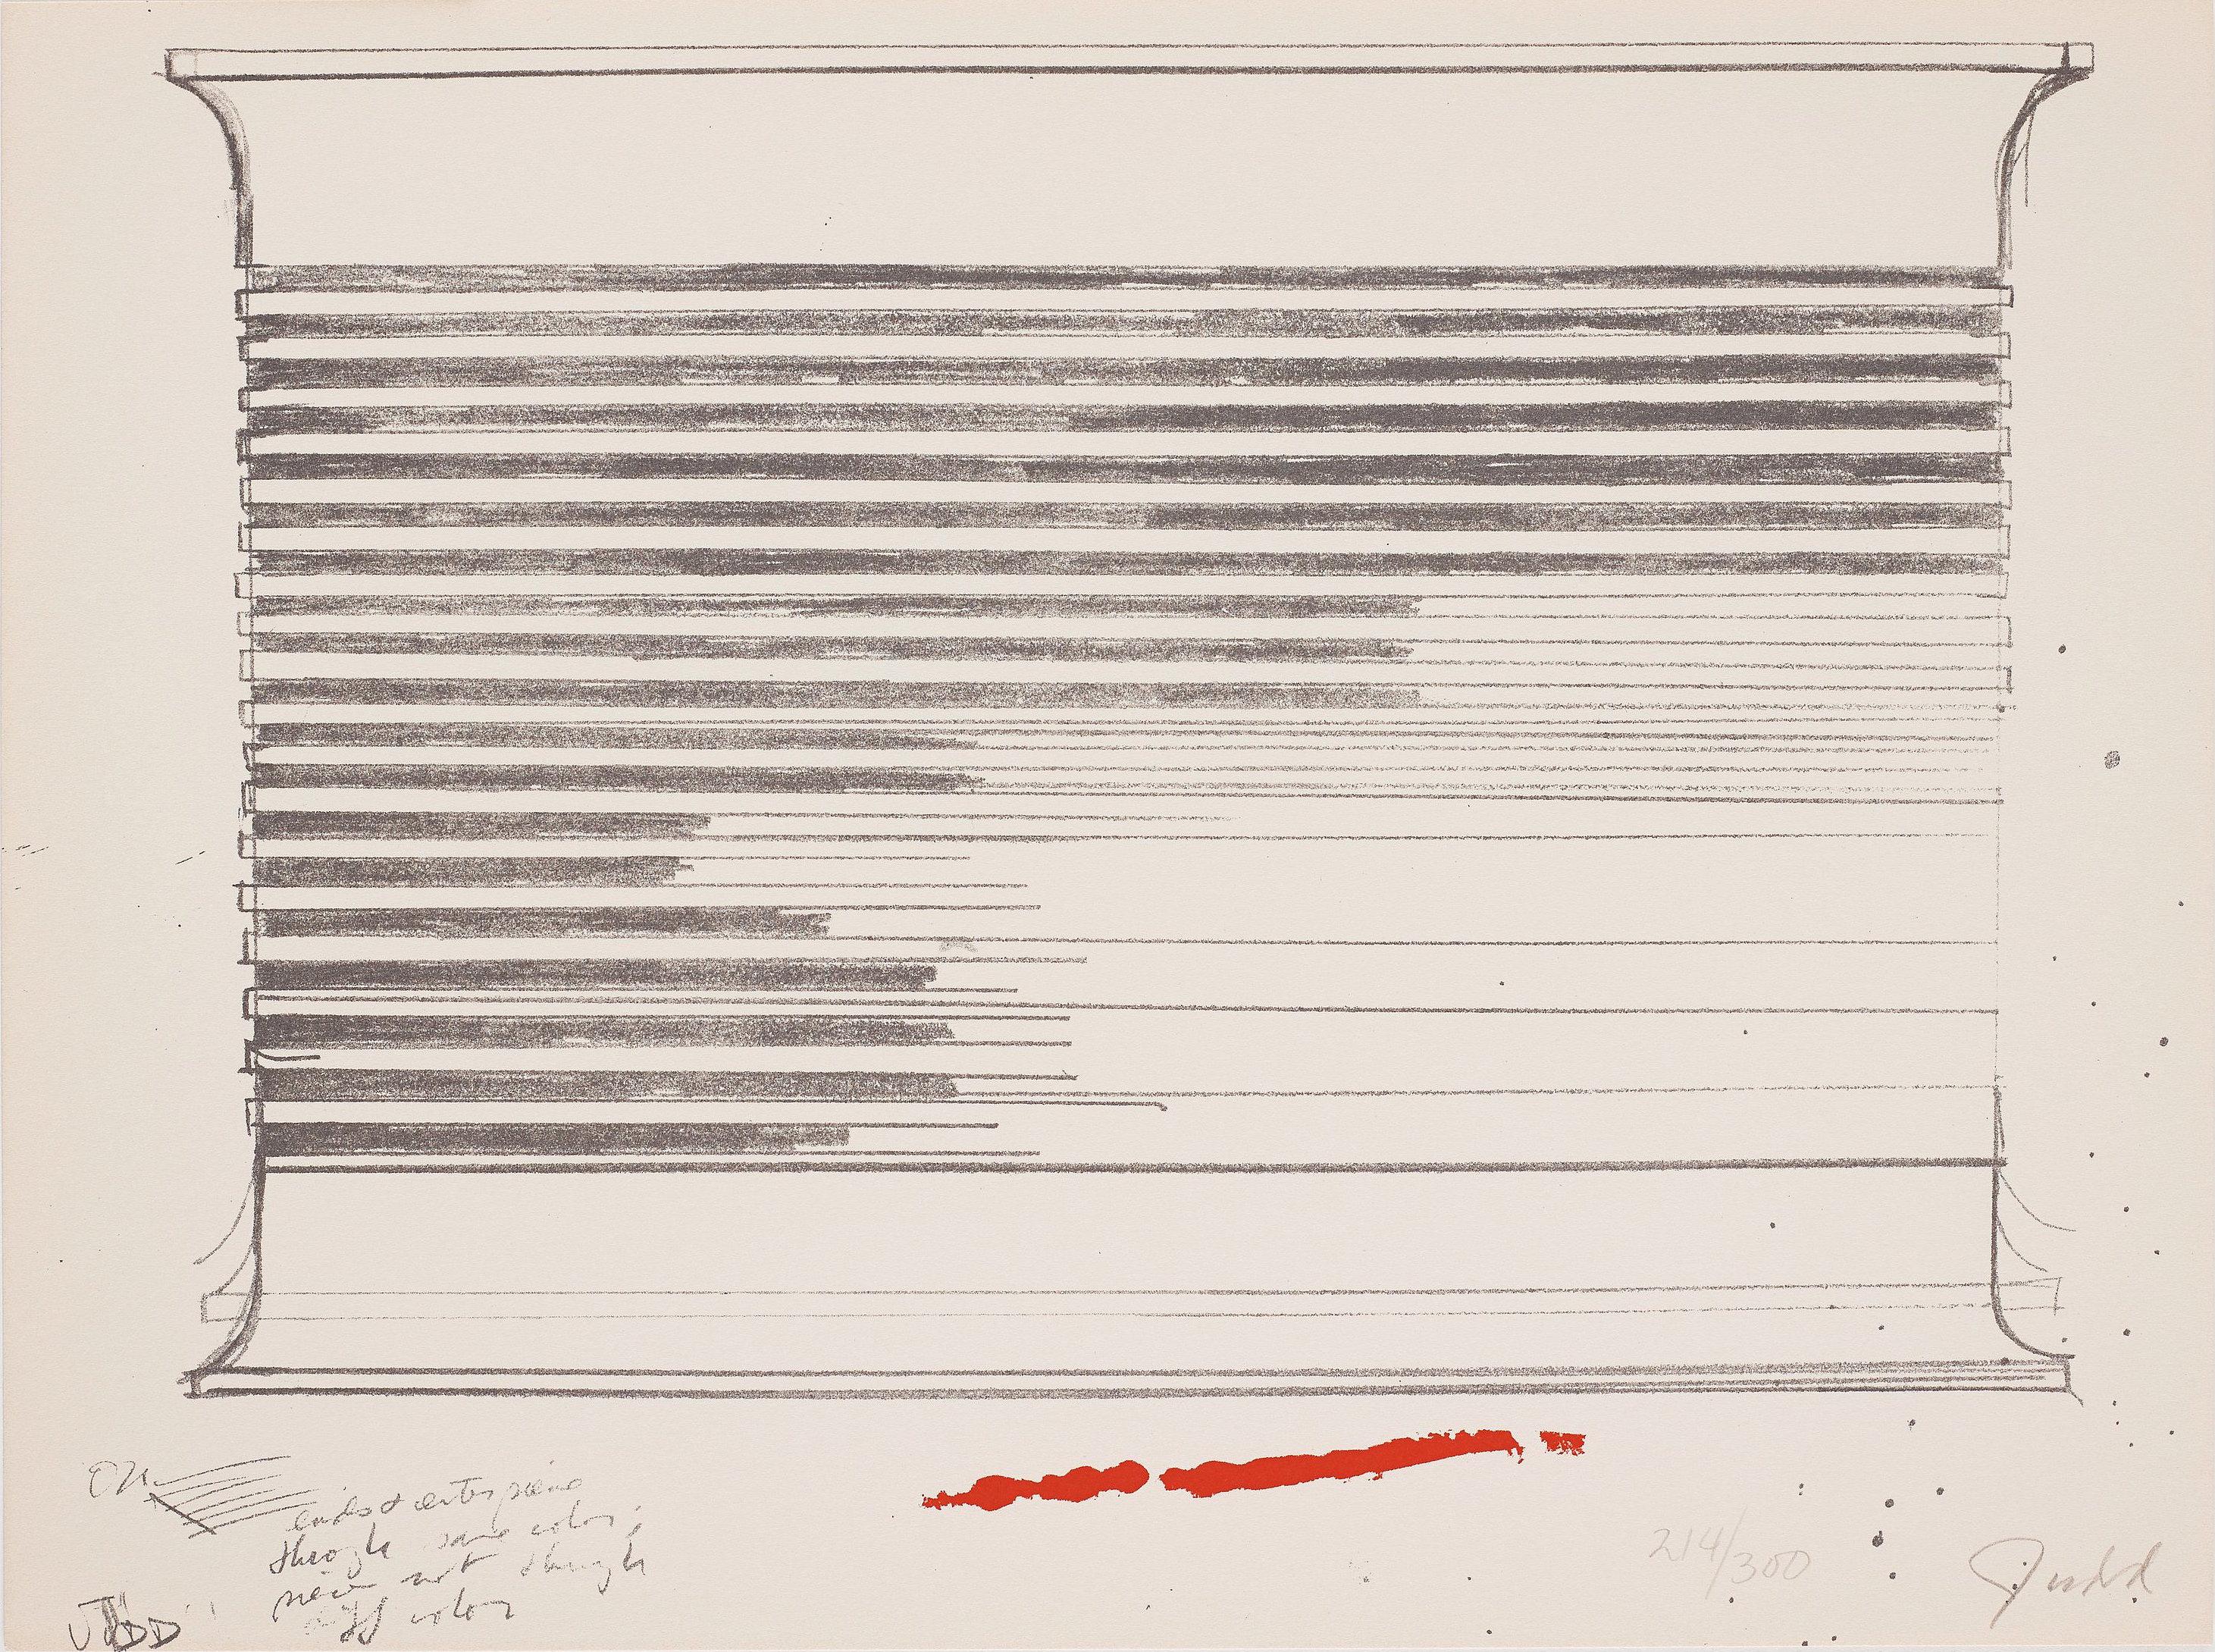 Donald Judd
Untitled, 1973

Lithograph and screenprint, on rag paper
Signed and numbered from the edition of 300
With the artist's copyright inkstamp verso
From The New York Collection for Stockholm
Printed by Styria Studio, Inc., New York
Published